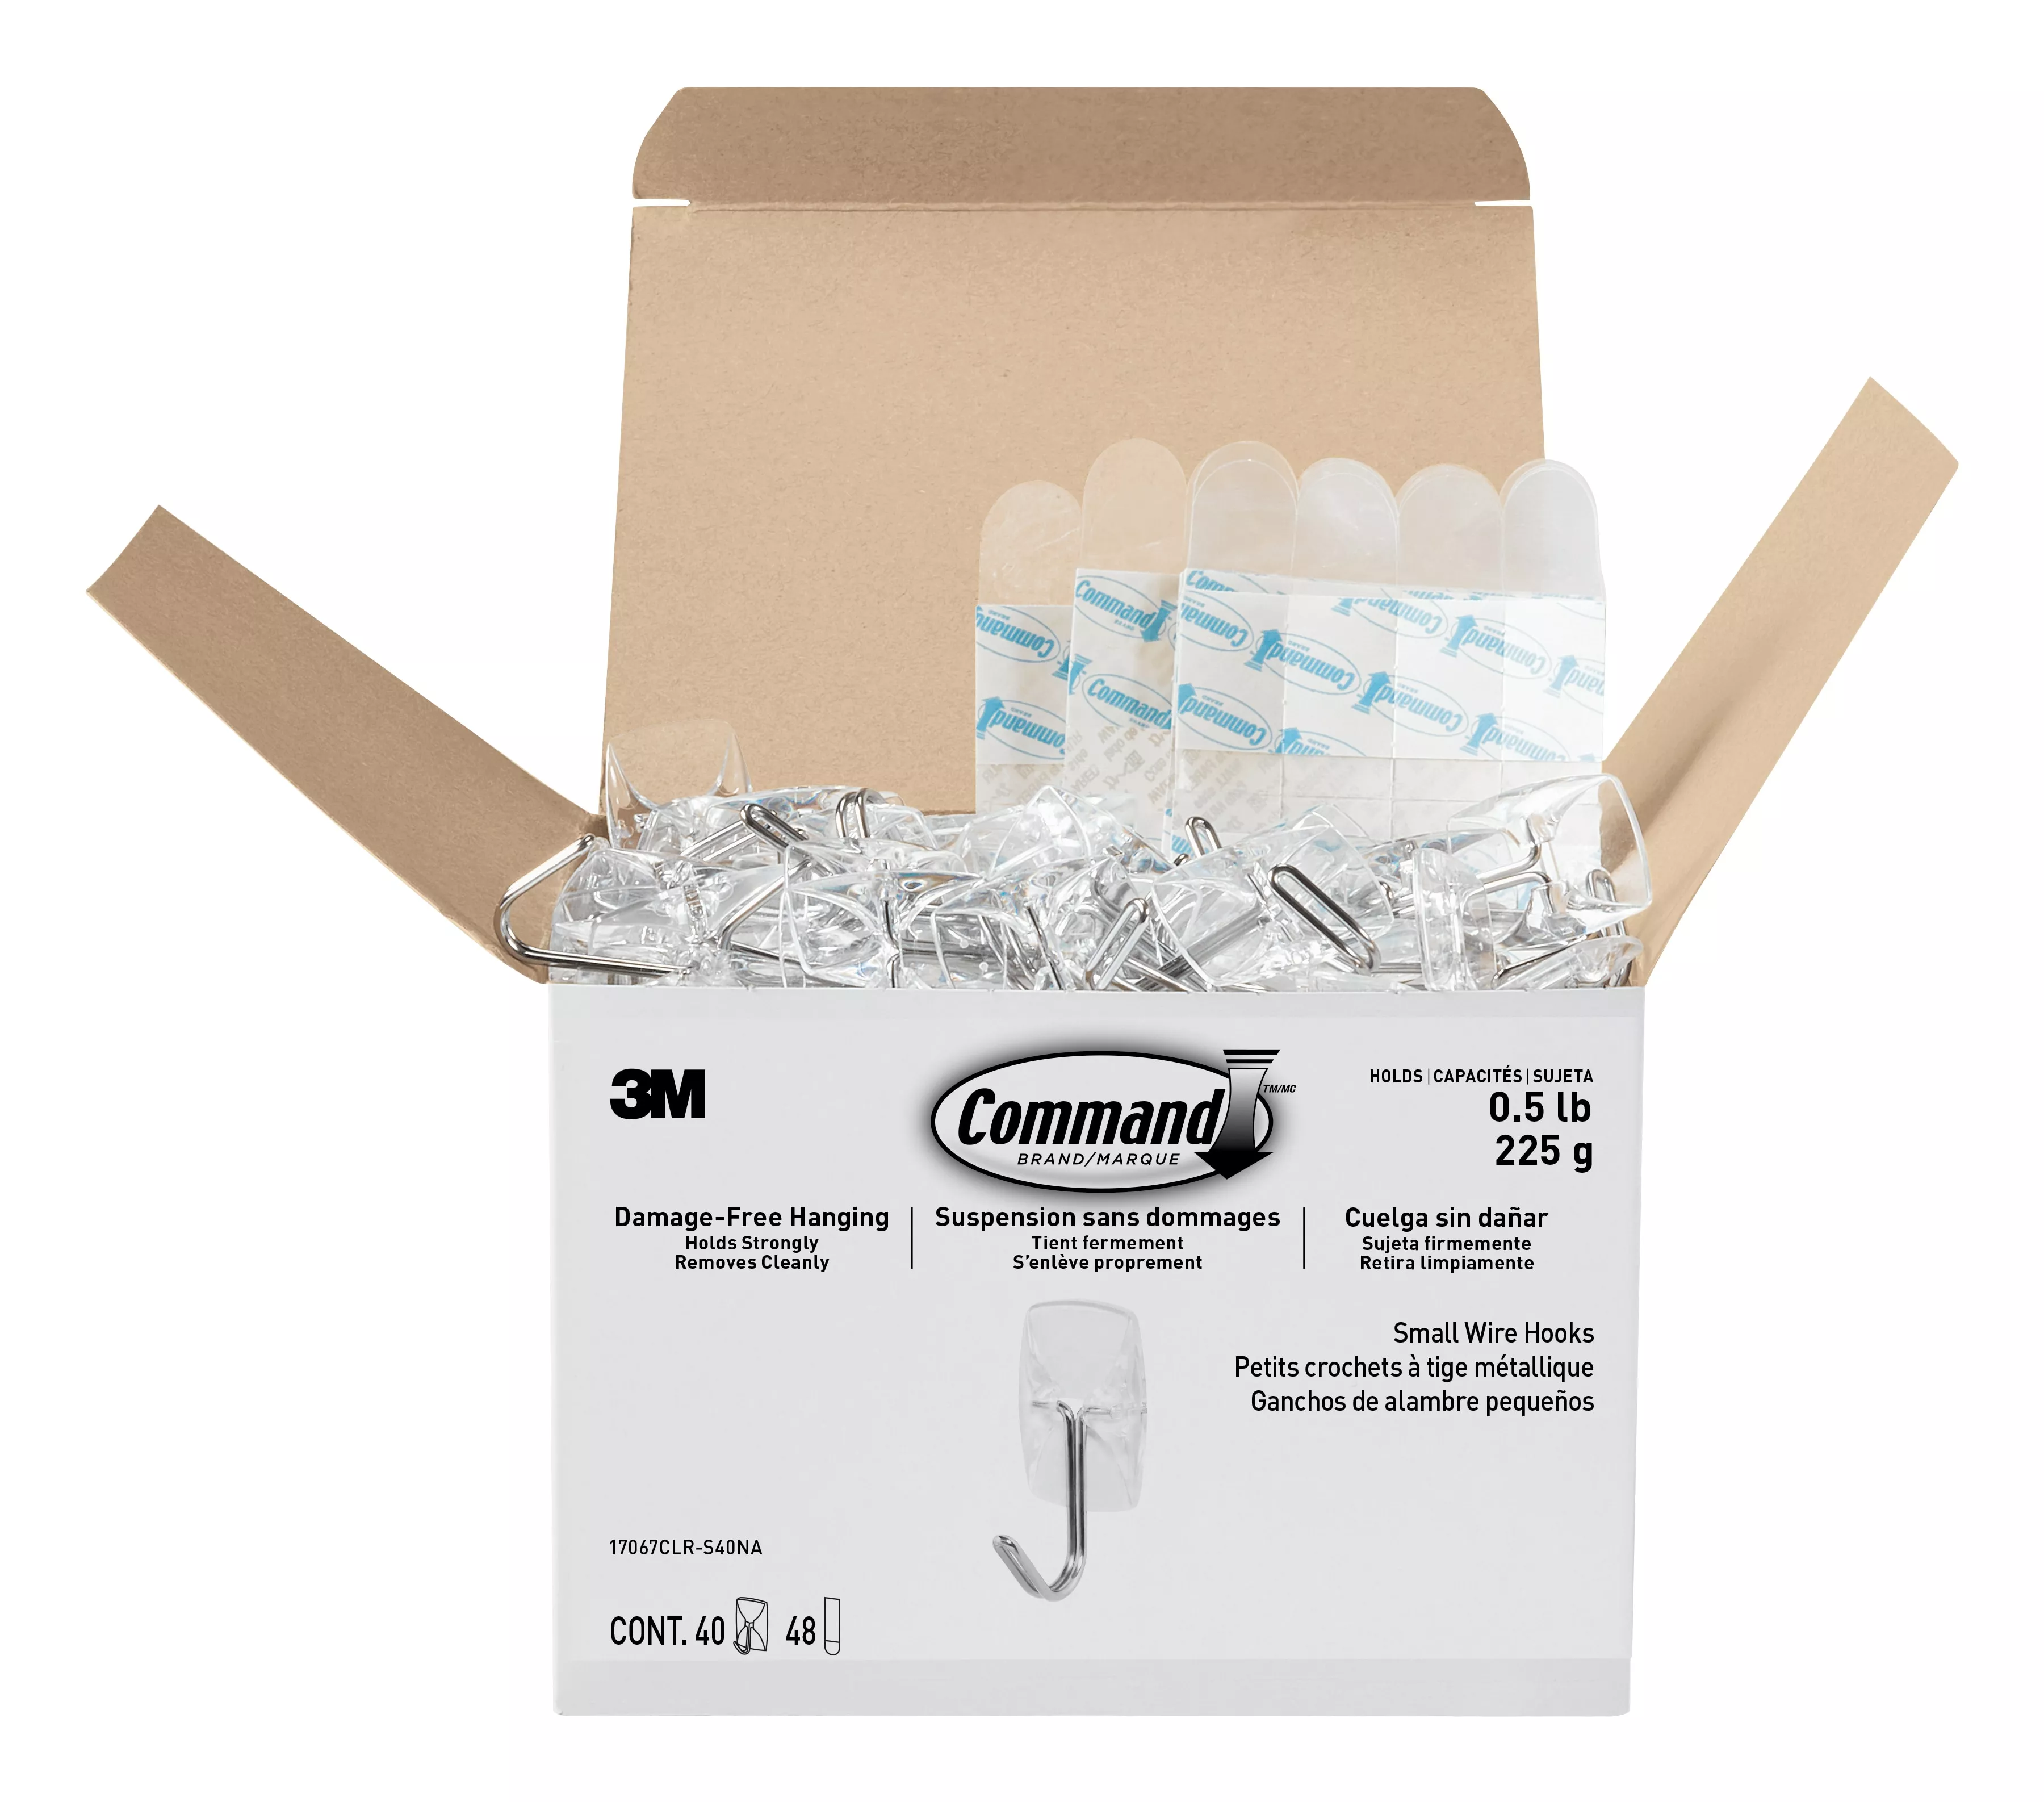 SKU 7100203901 | Command™ Clear Small Wire Hook 17067CLR-S40NA